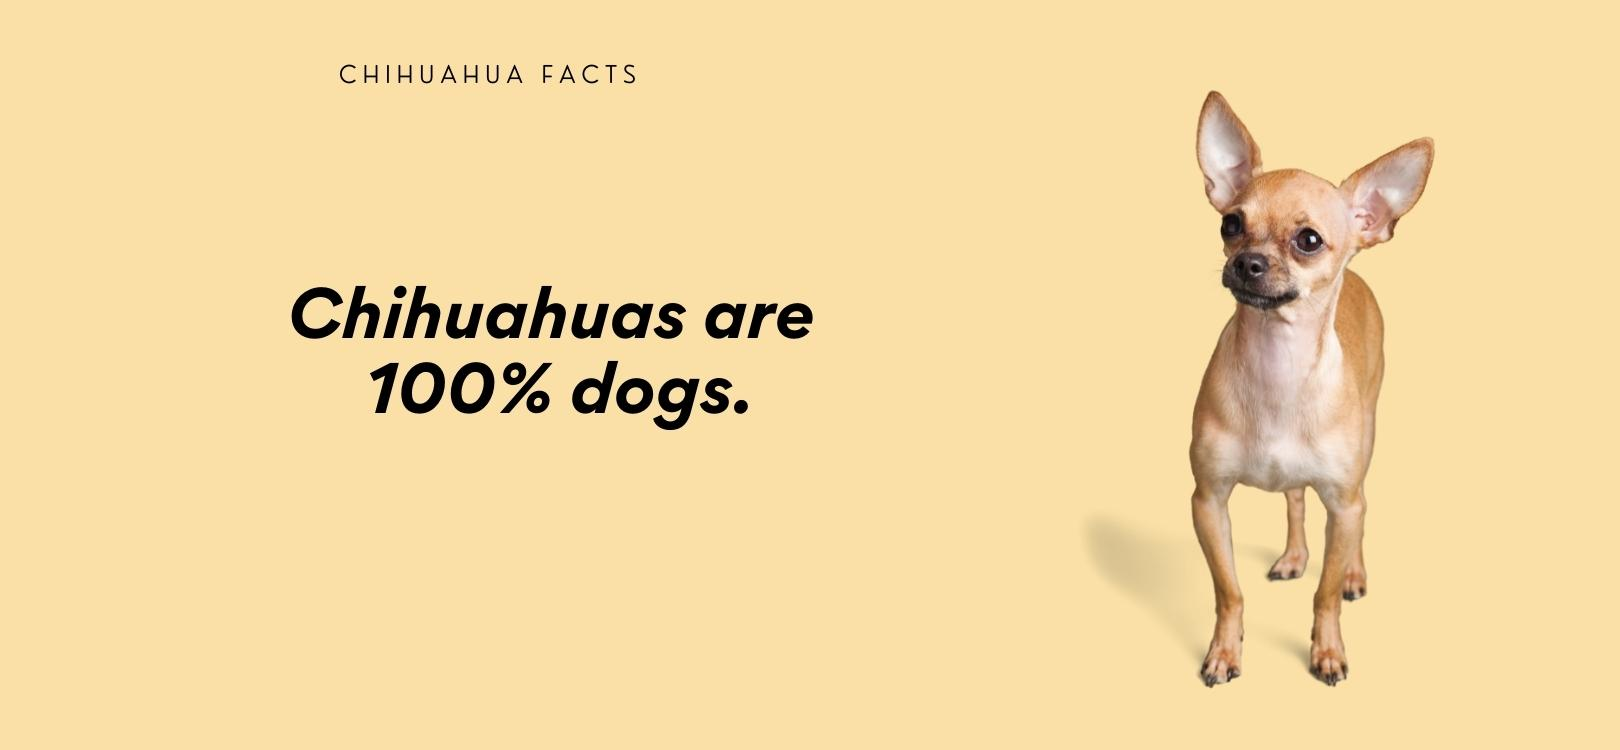 are chihuahuas really dogs